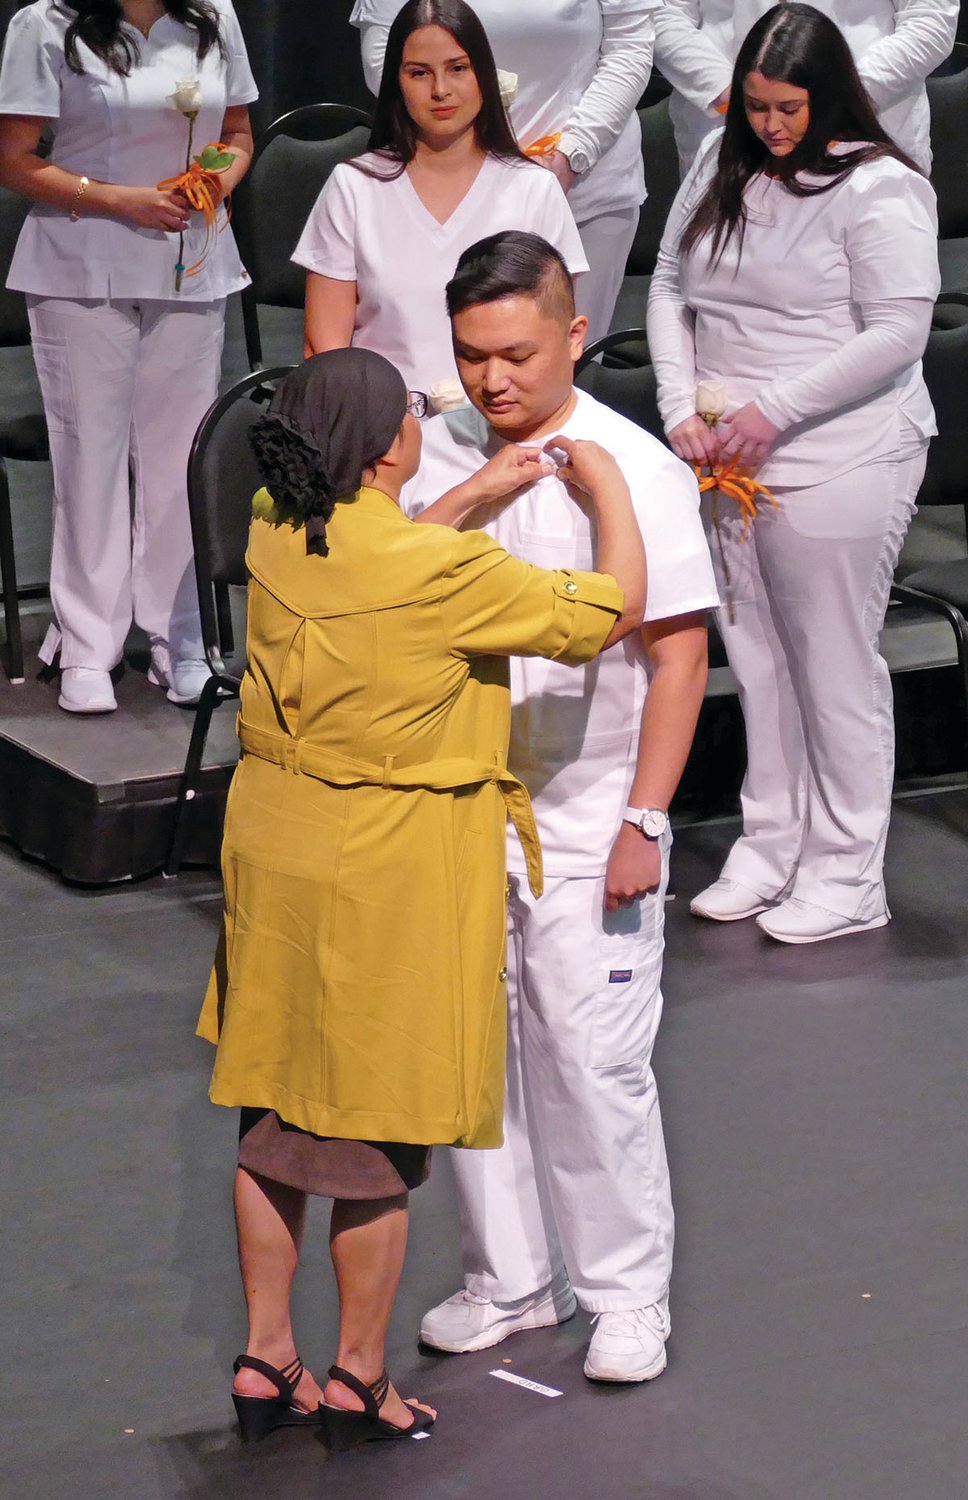 Karl Asumen of Highlands County was pinned by his mother, Amie.